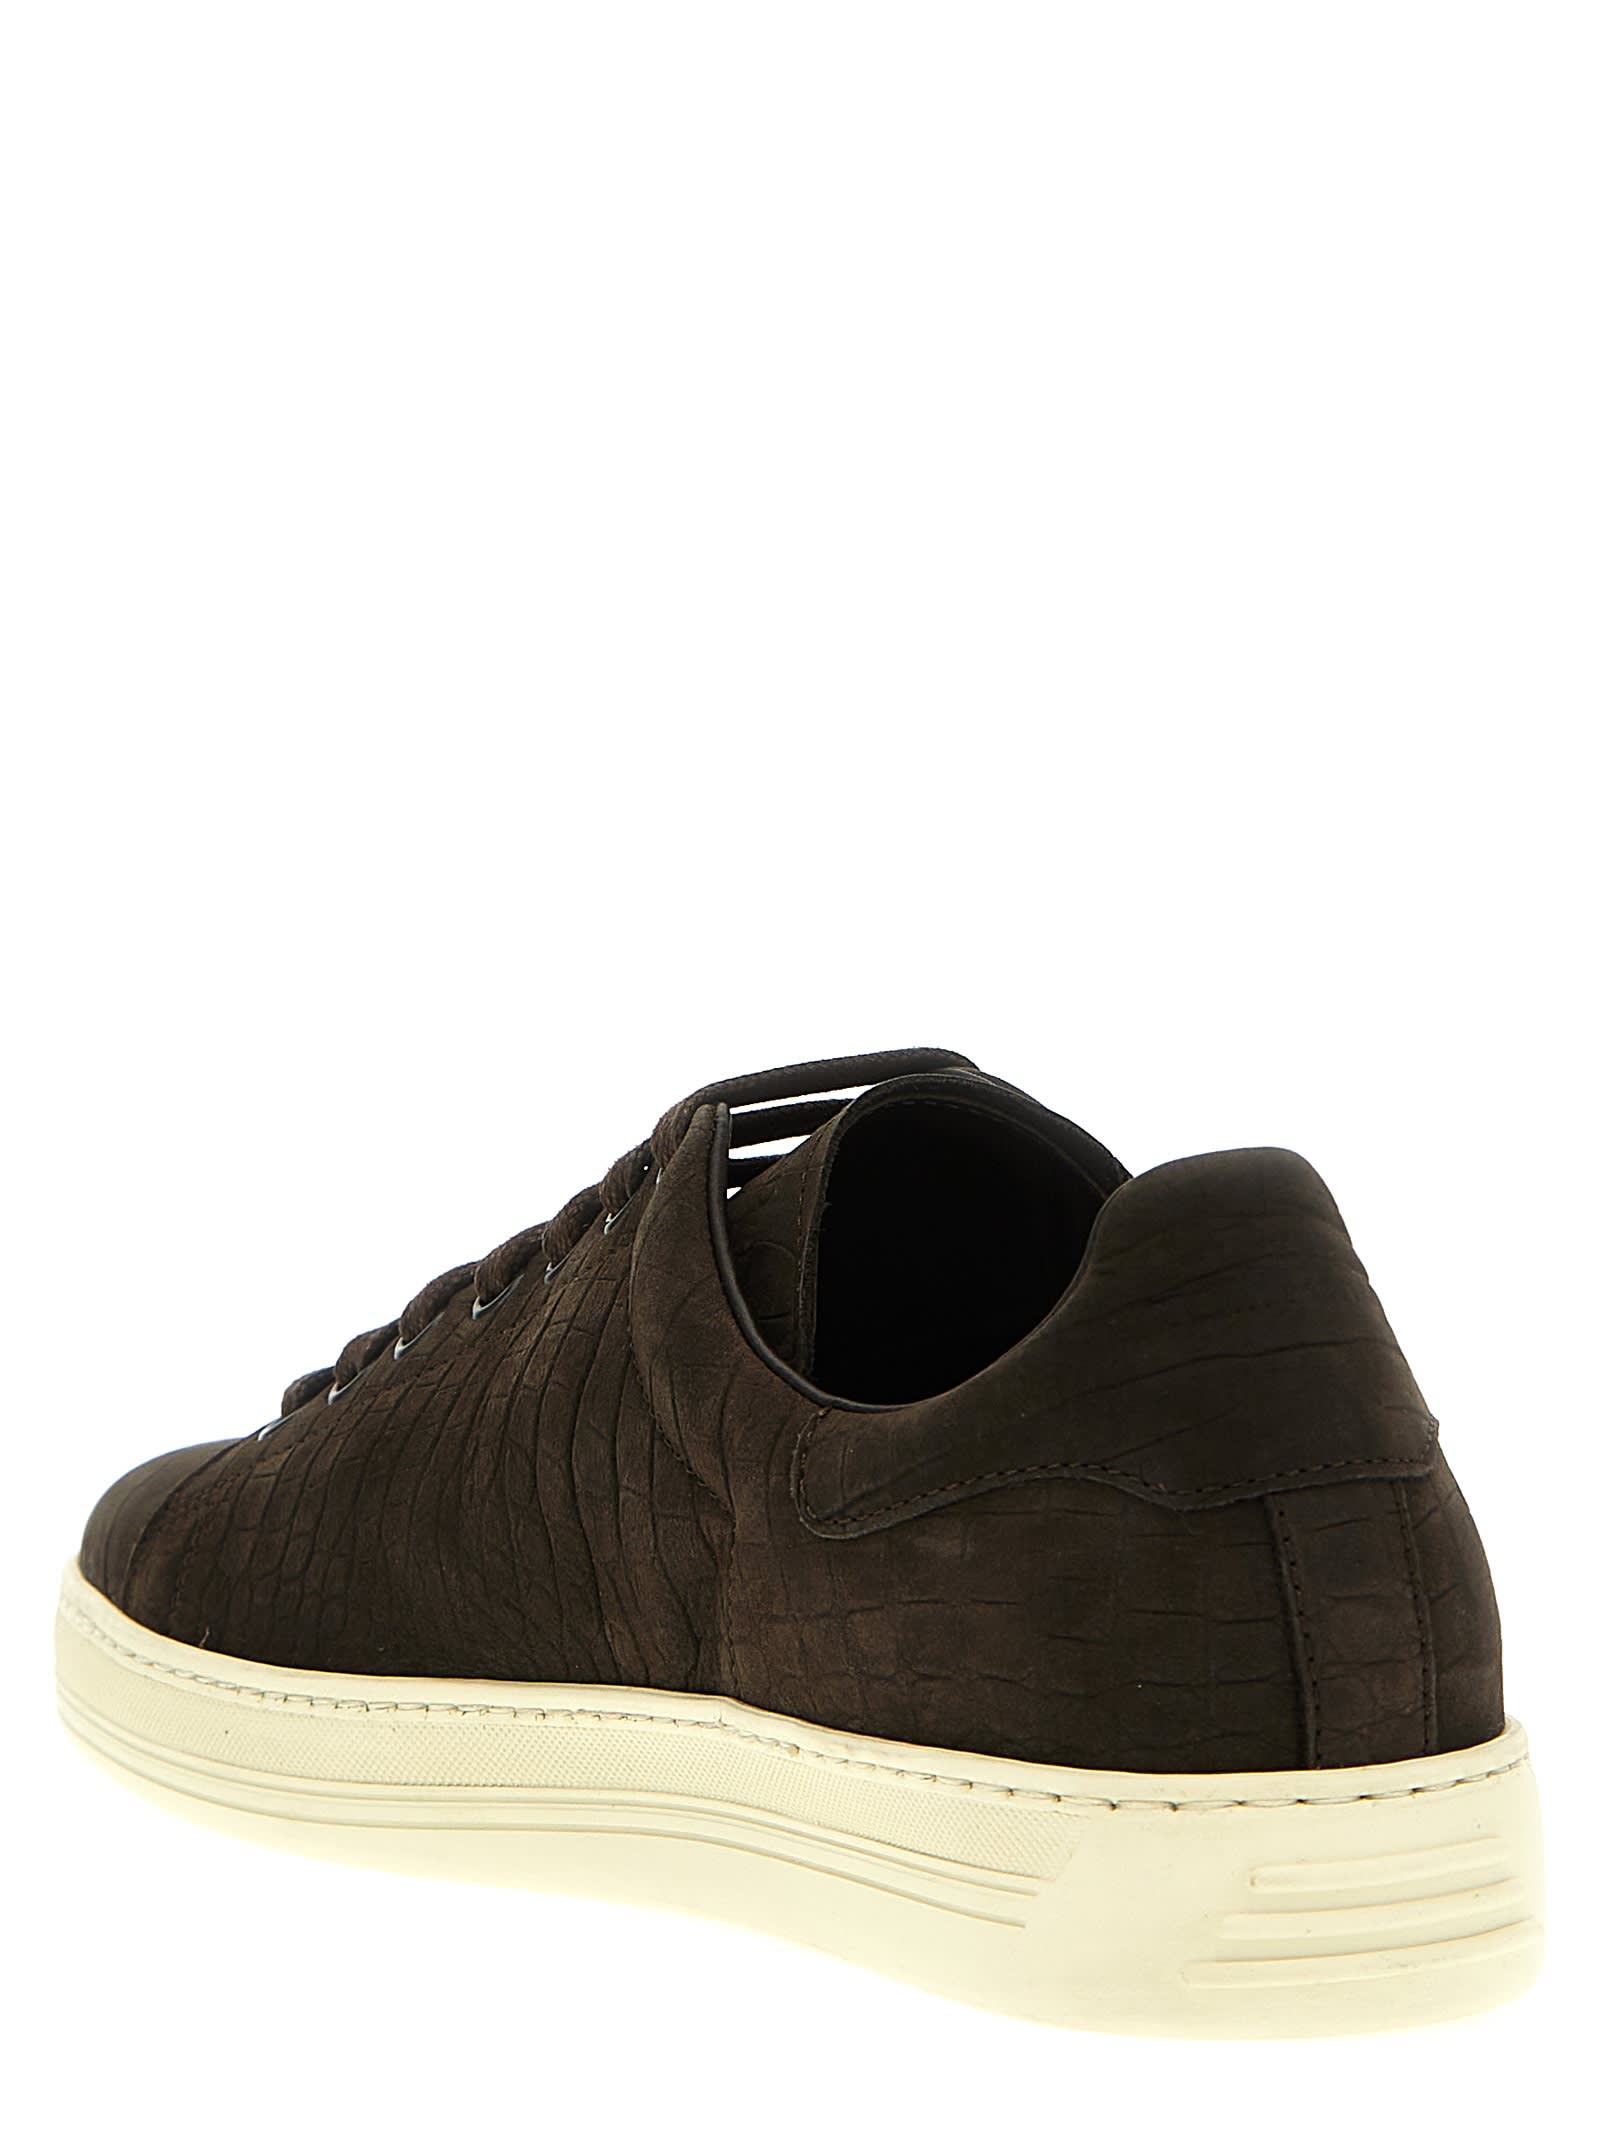 Shop Tom Ford Coconut Nubuk Sneakers